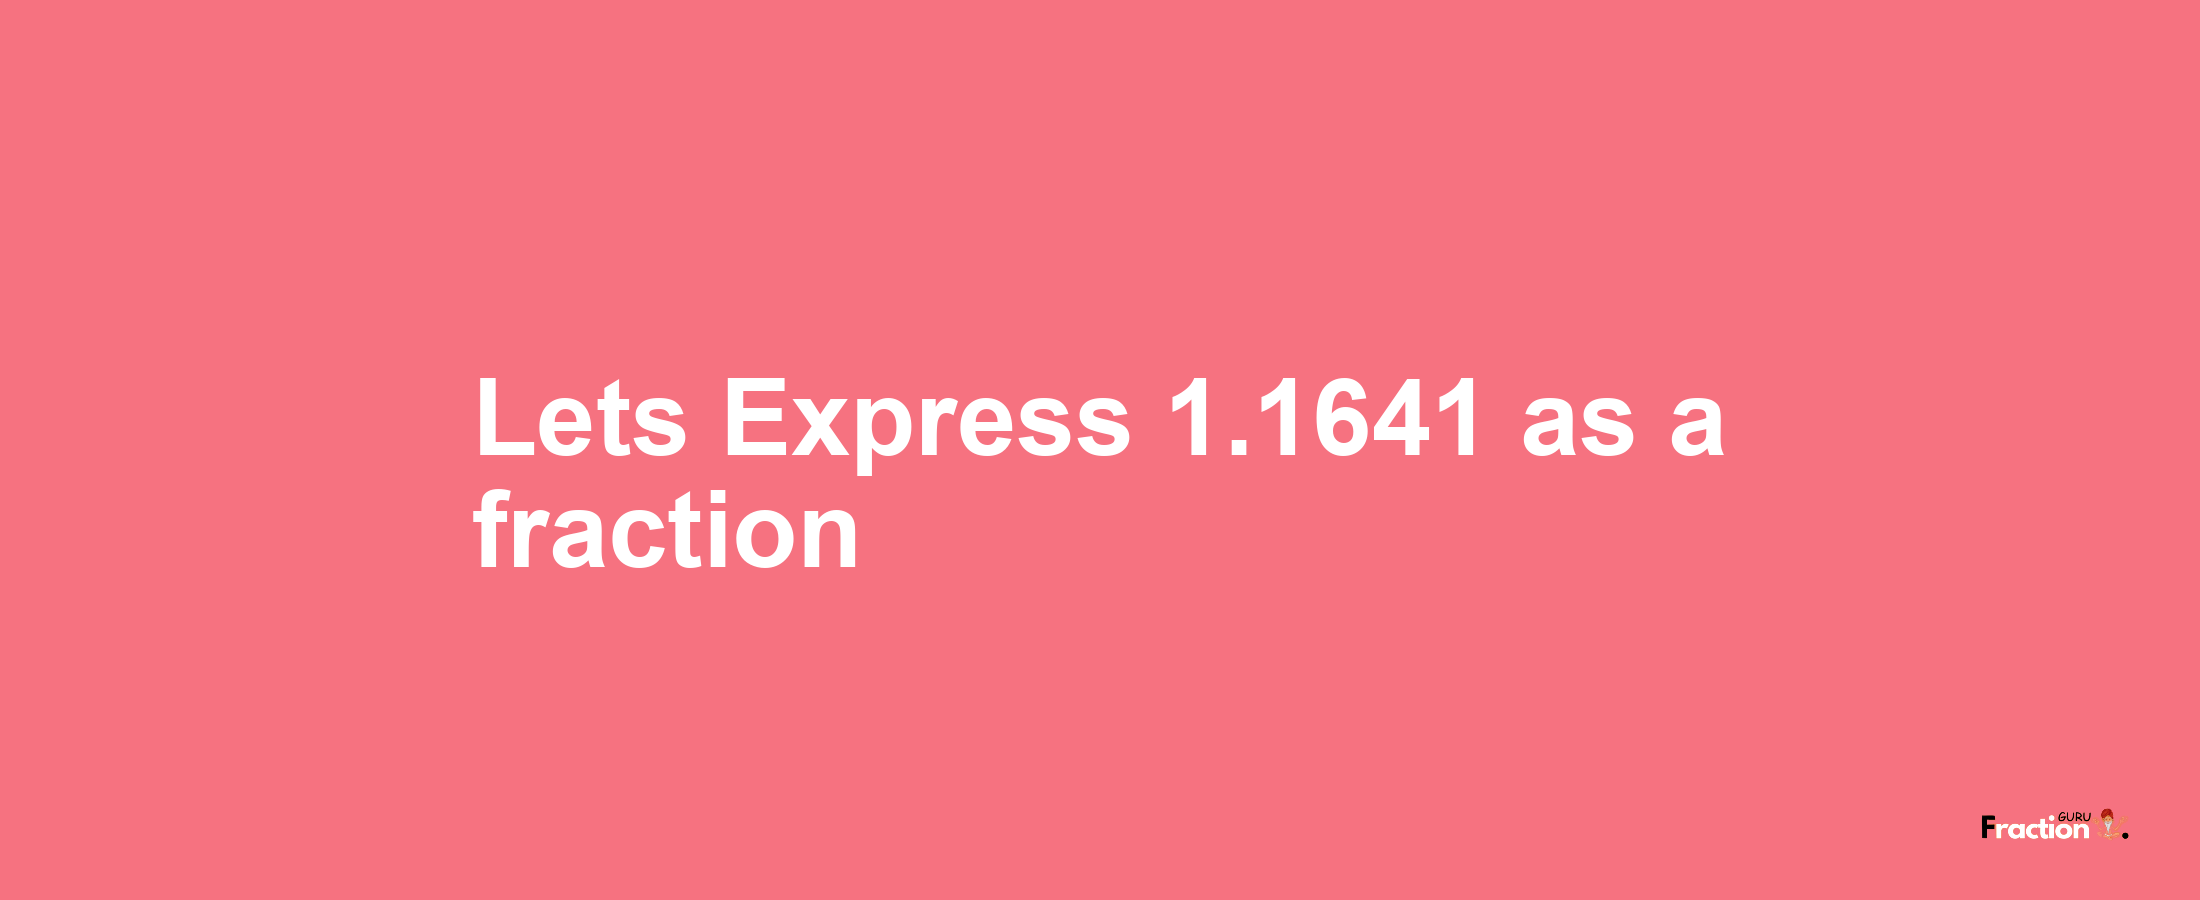 Lets Express 1.1641 as afraction